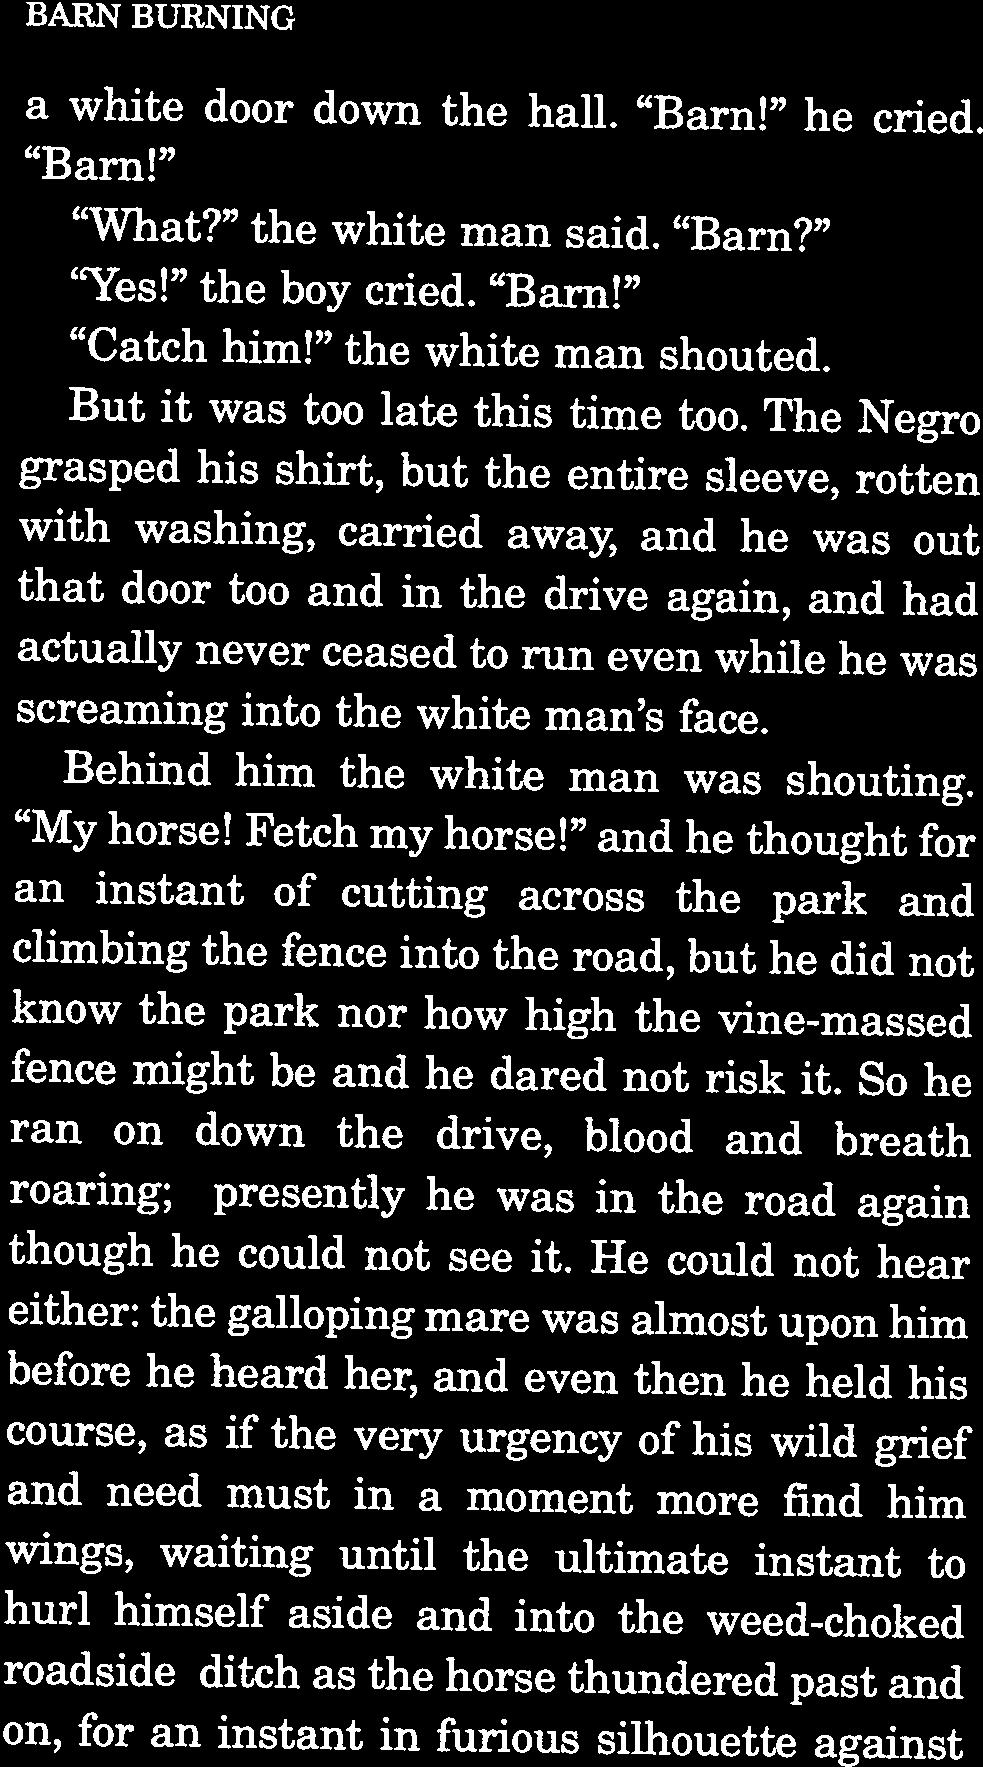 The Negro grasped his shirt, but the entire sleeve, rotten with washing, carried away, and he was out that door too and in the drive again, and had actually never ceased to run even while he was